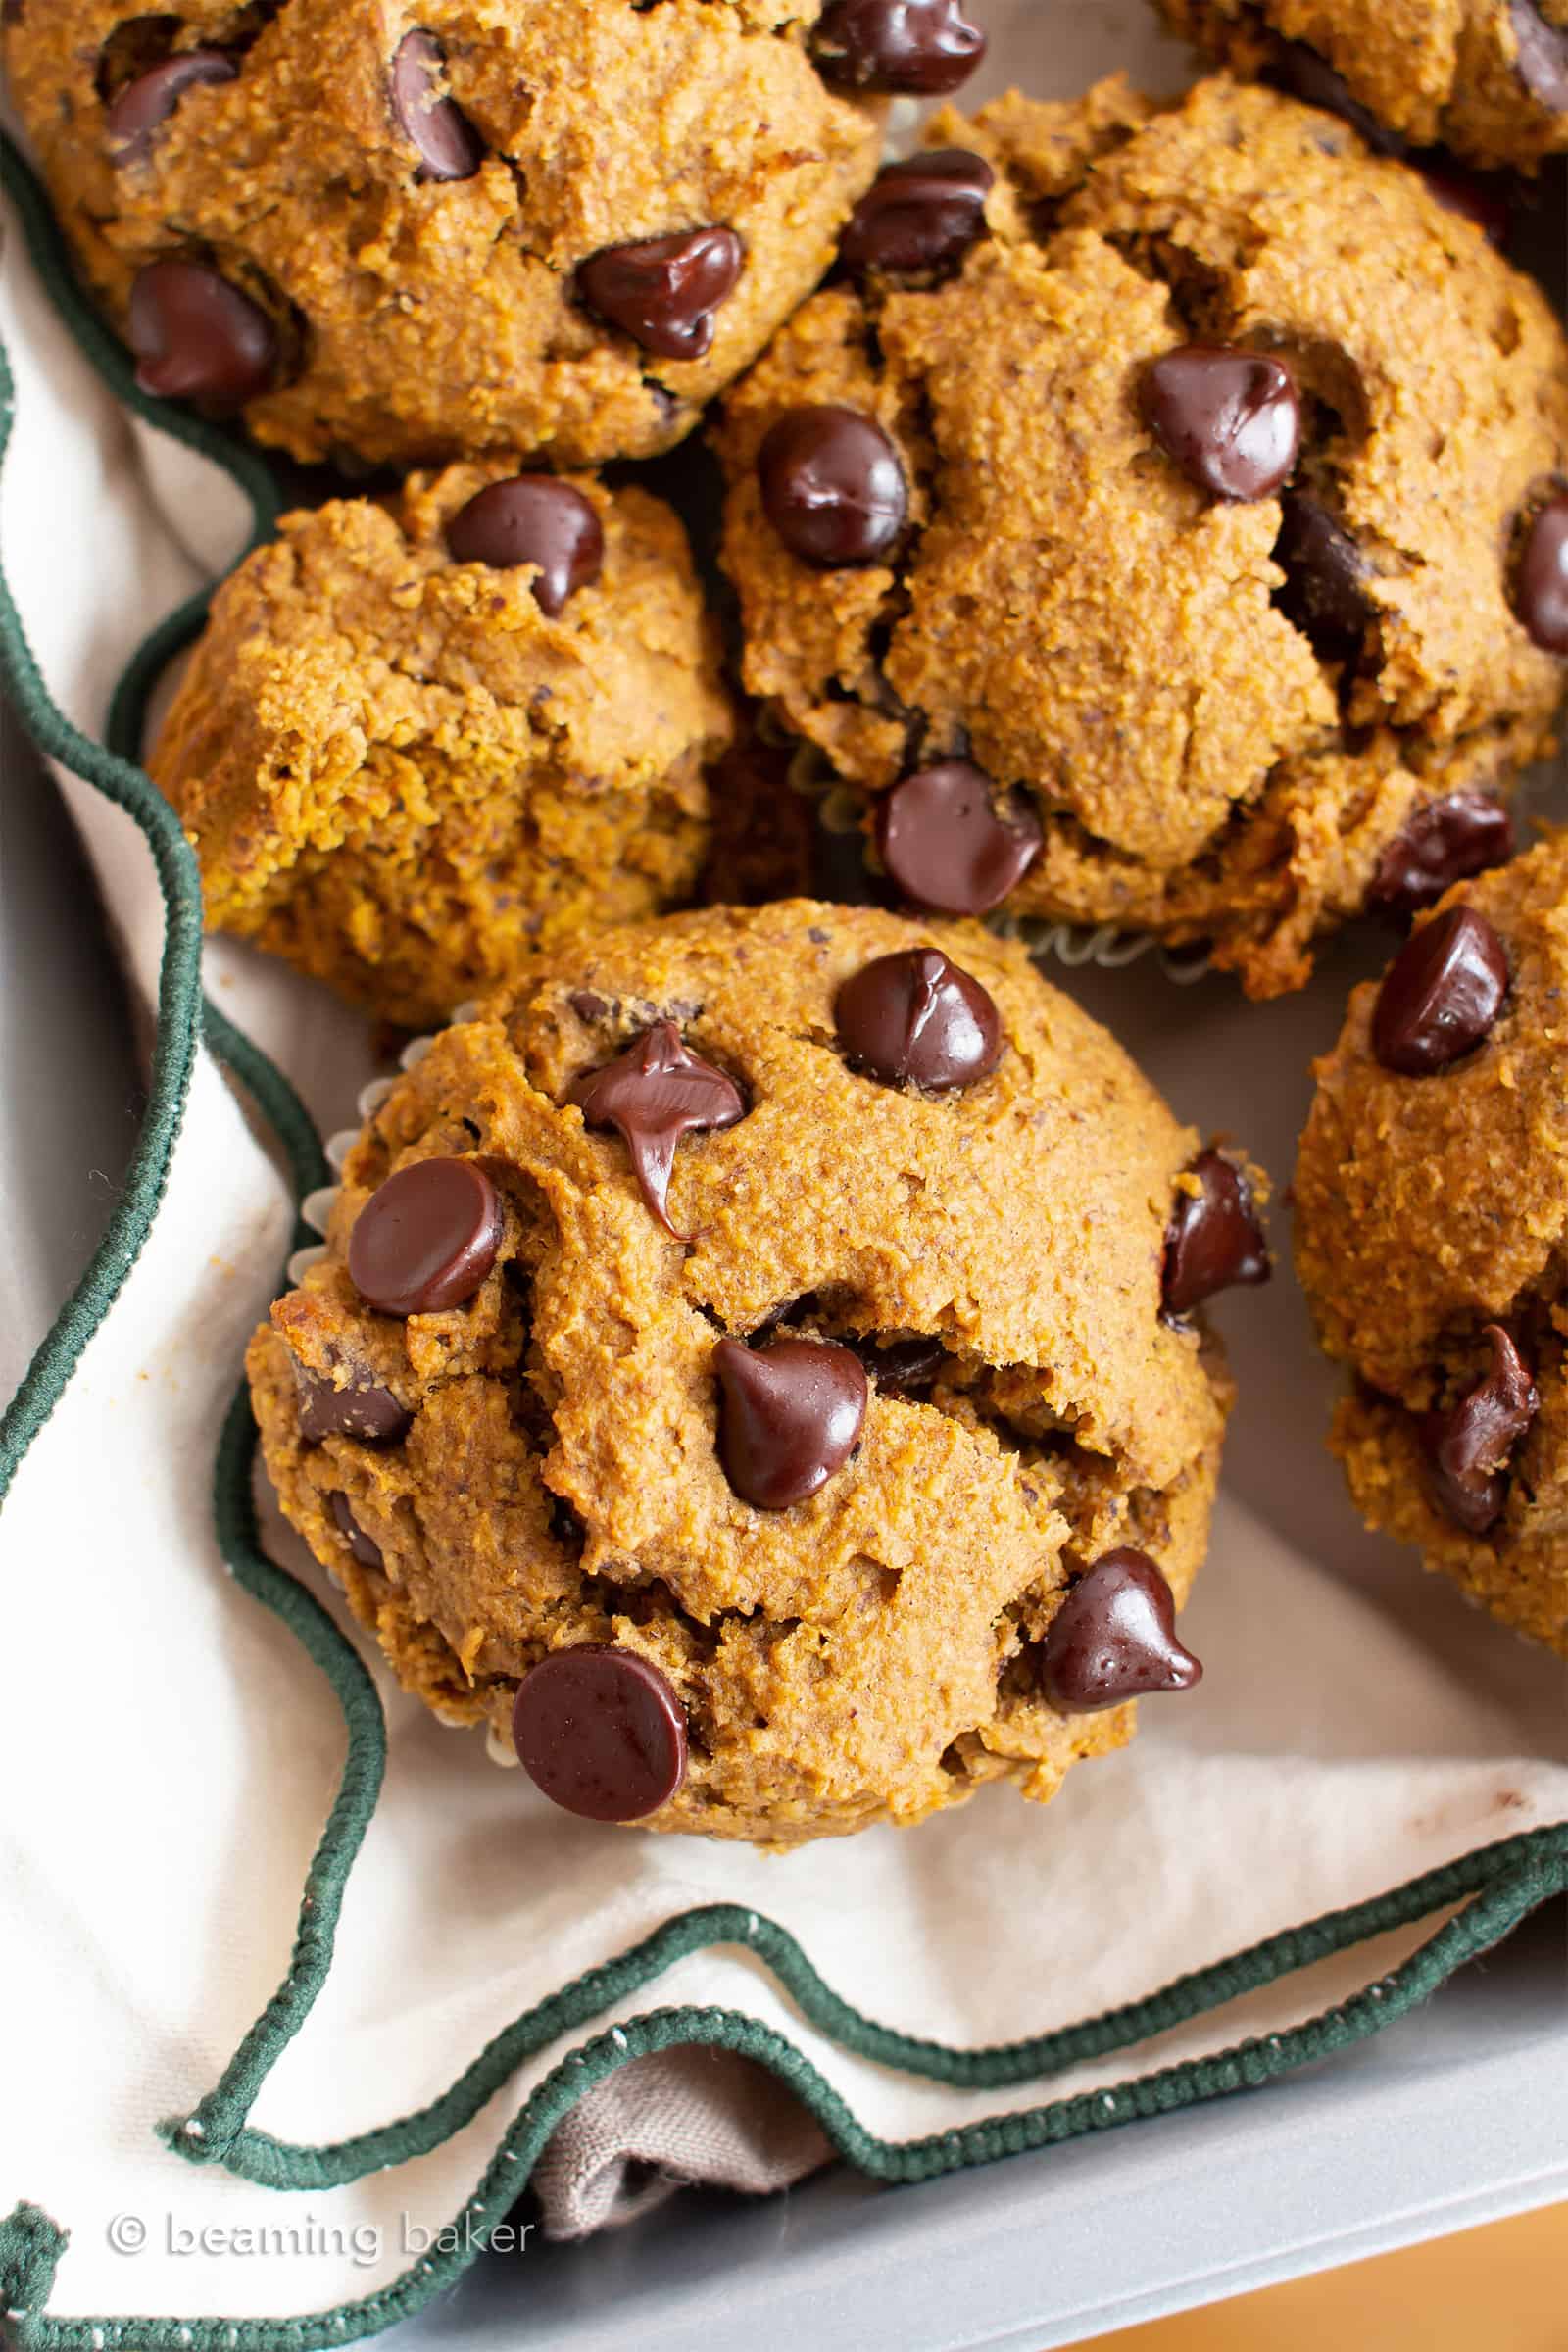 Gluten Free Pumpkin Chocolate Chip Muffins Recipe (GF): this easy gluten free pumpkin muffins recipe makes perfectly spiced GF pumpkin muffins! Made in 1-bowl with healthy, whole ingredients. #Pumpkin #Muffins #Chocolate #GlutenFree #Vegan | Recipe at BeamingBaker.com